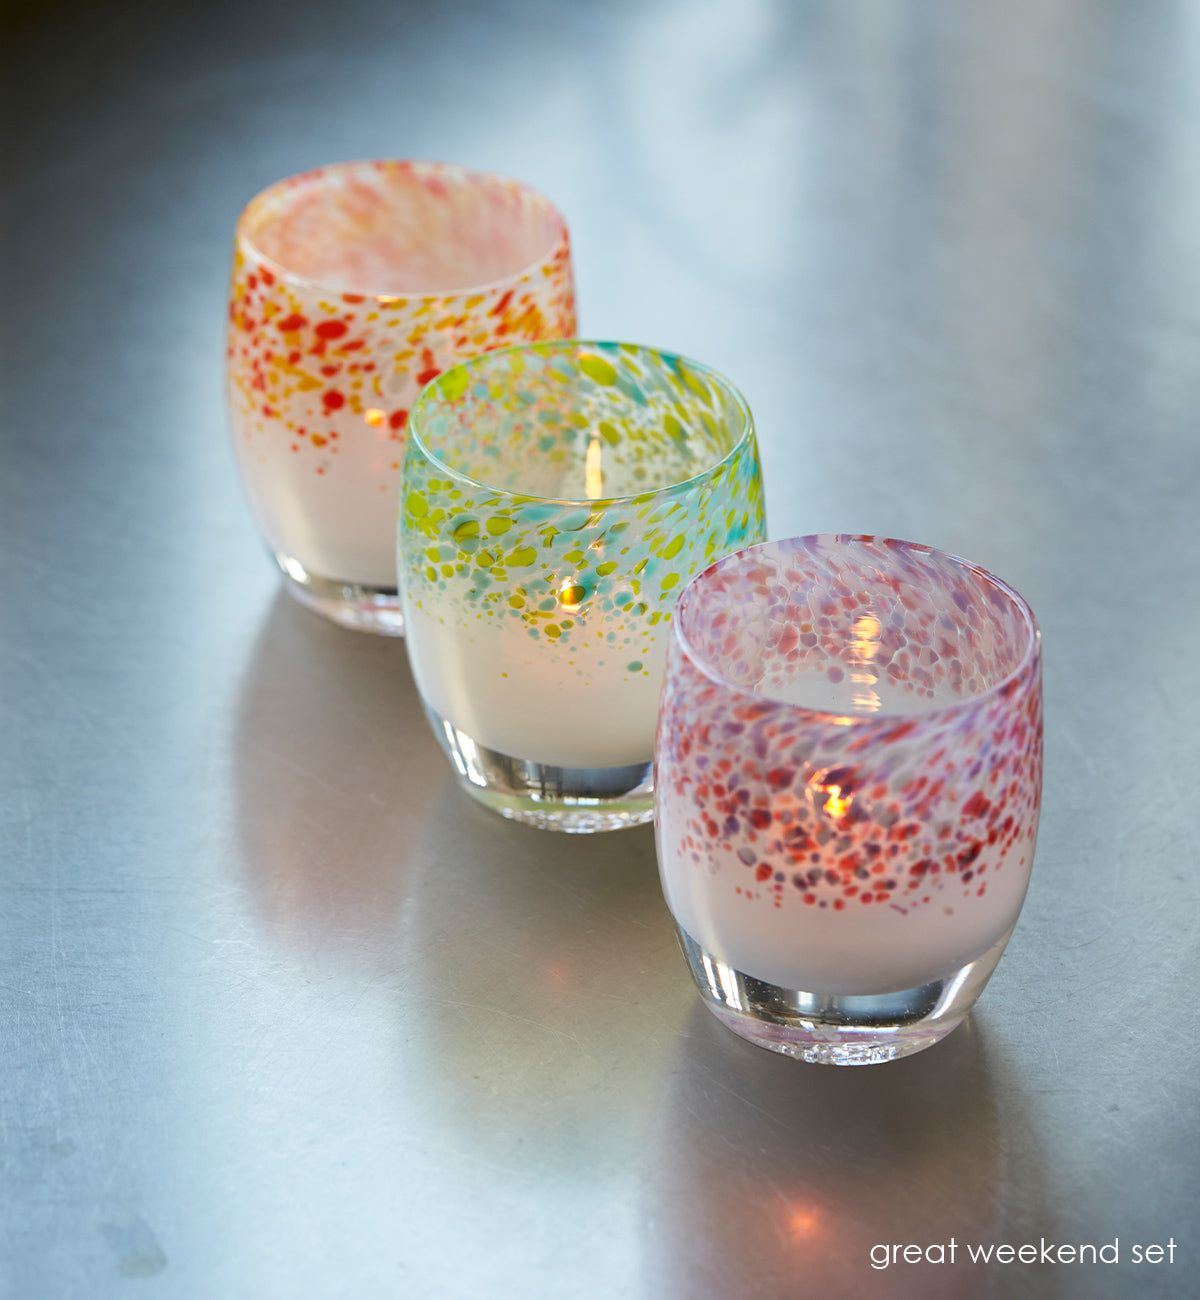 great weekend set spring colors topping hand-blown glass votive candle holders on a metal table.